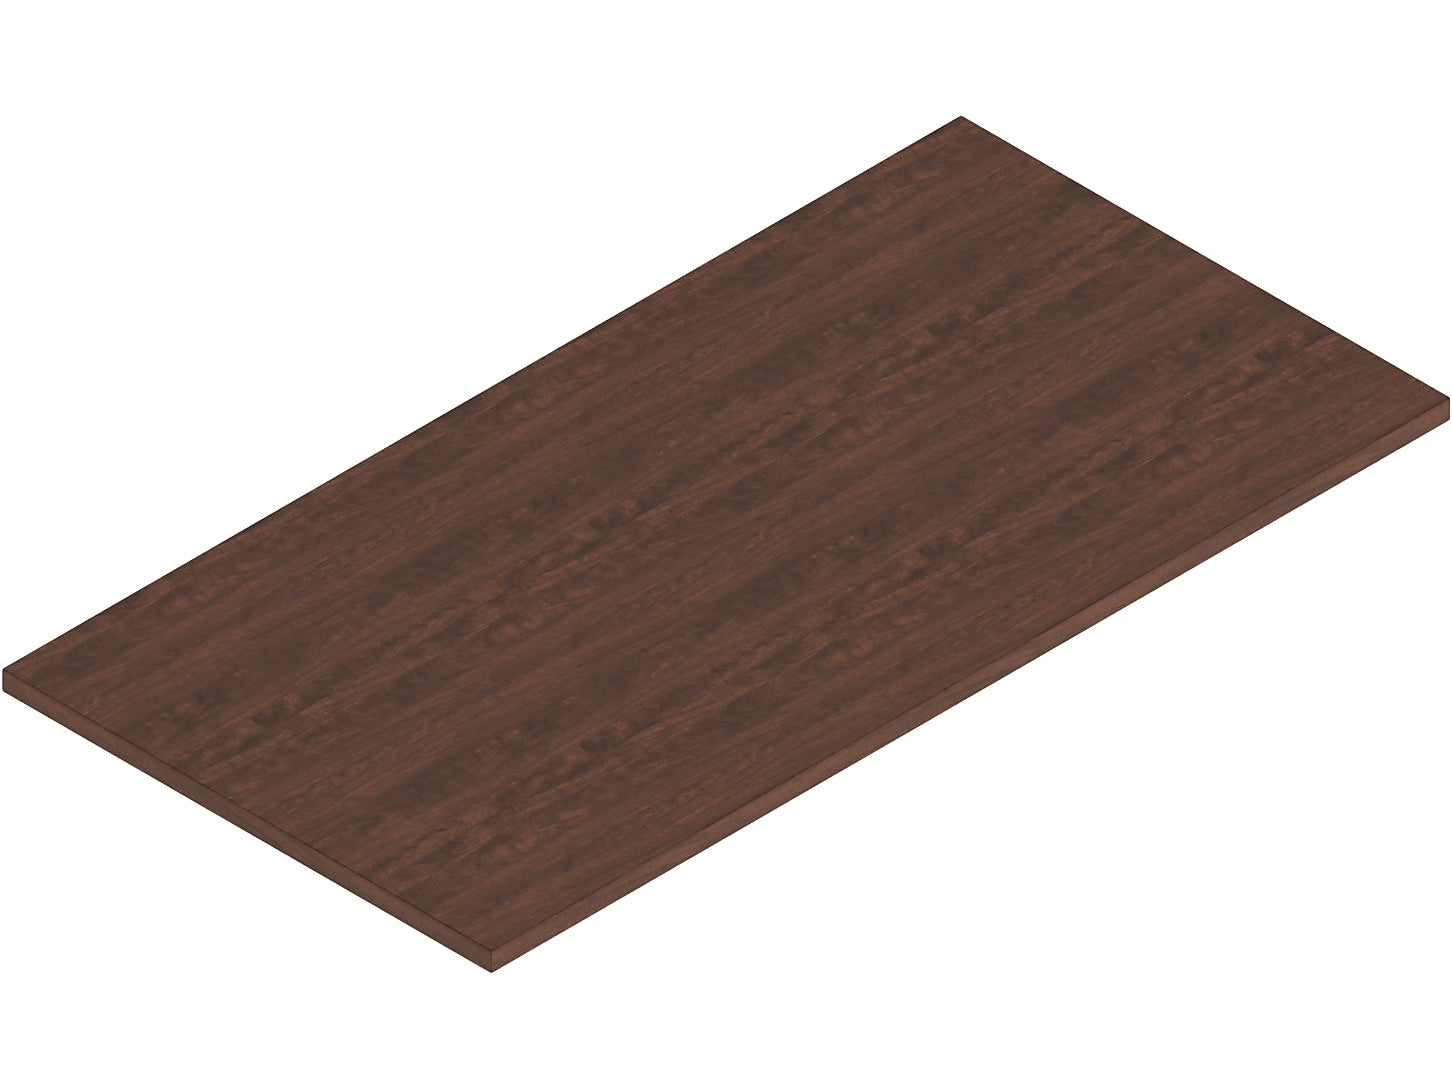 Offices to go Superior 48" Table Top, American Dark Cherry